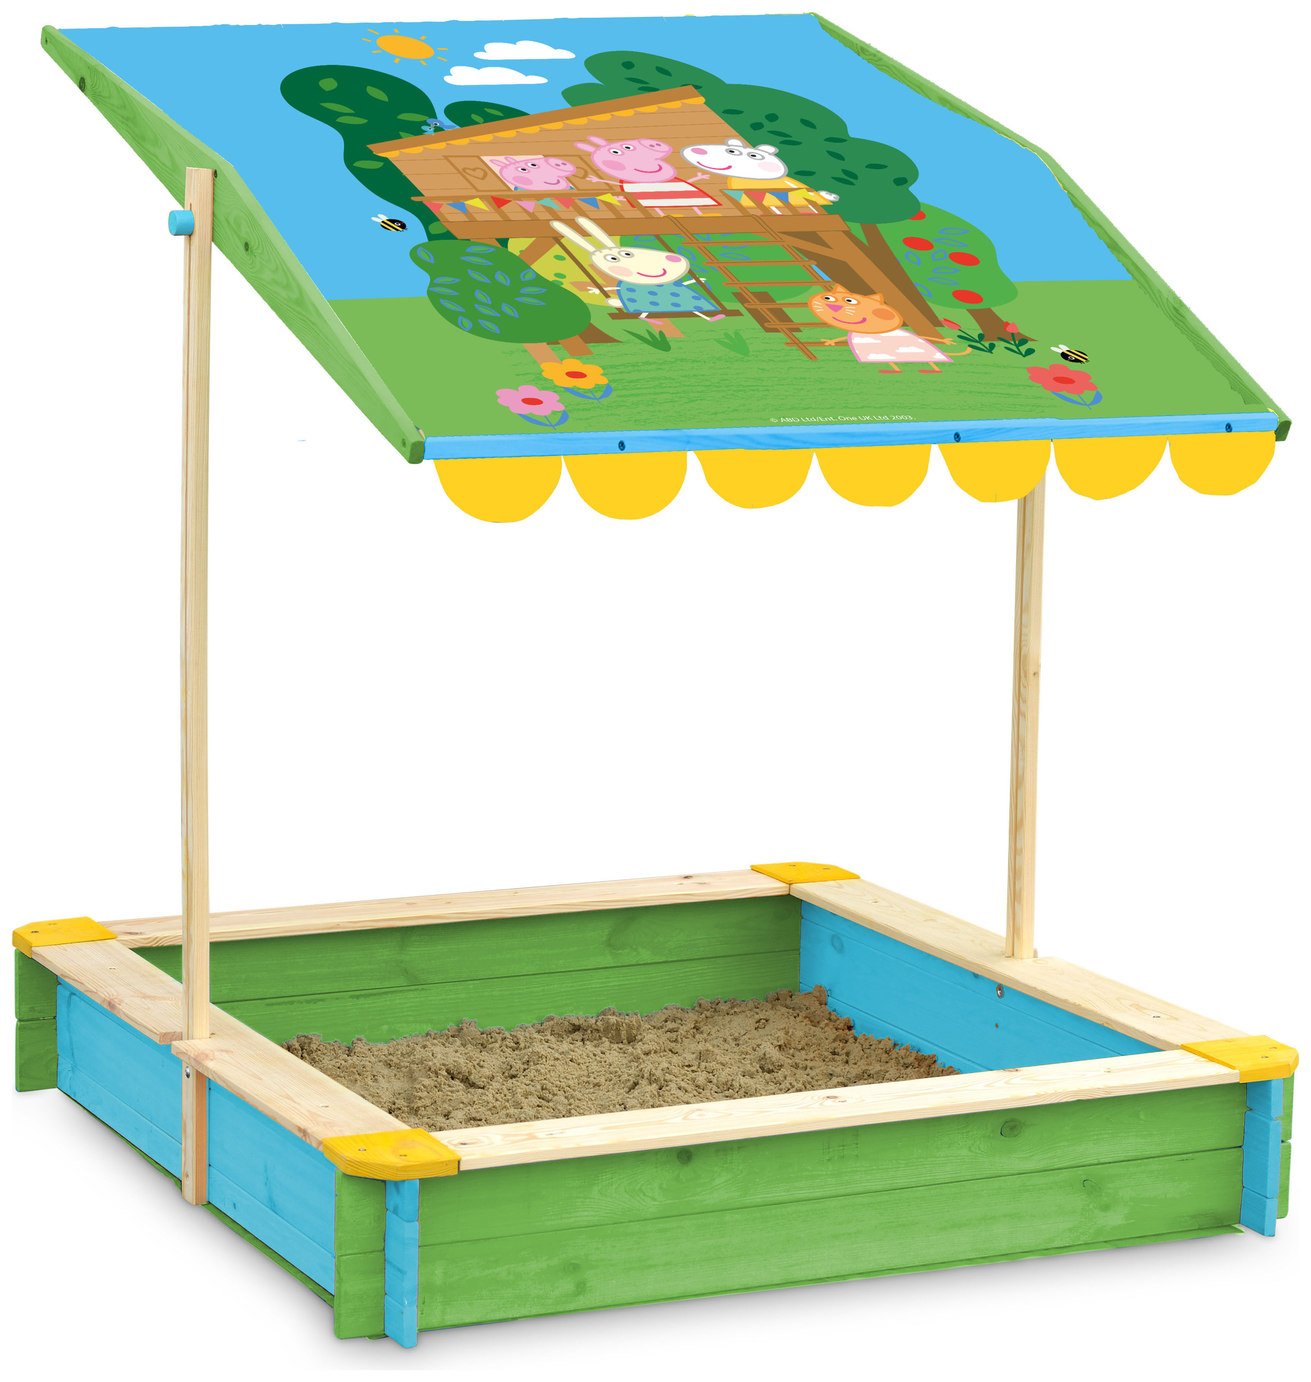 Peppa Pig Sandpit with Roof review